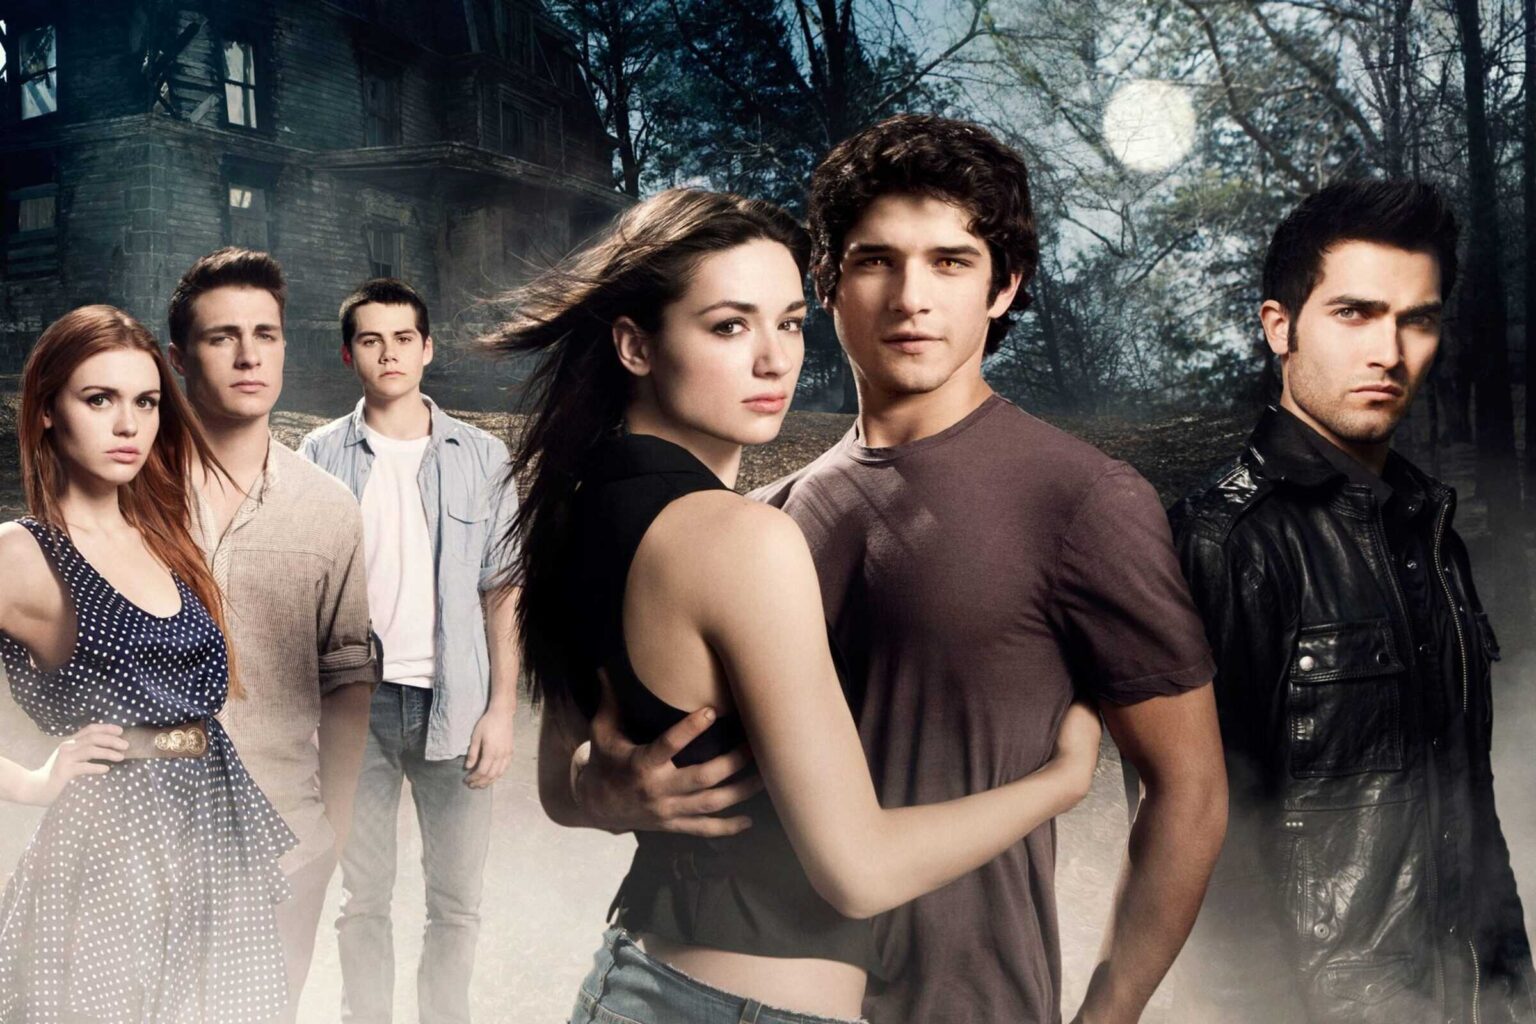 It's been ten years since the cast of 'Teen Wolf' went off to make a name for themselves. Are fans ready for the old Beacon Hills gang to get back together?